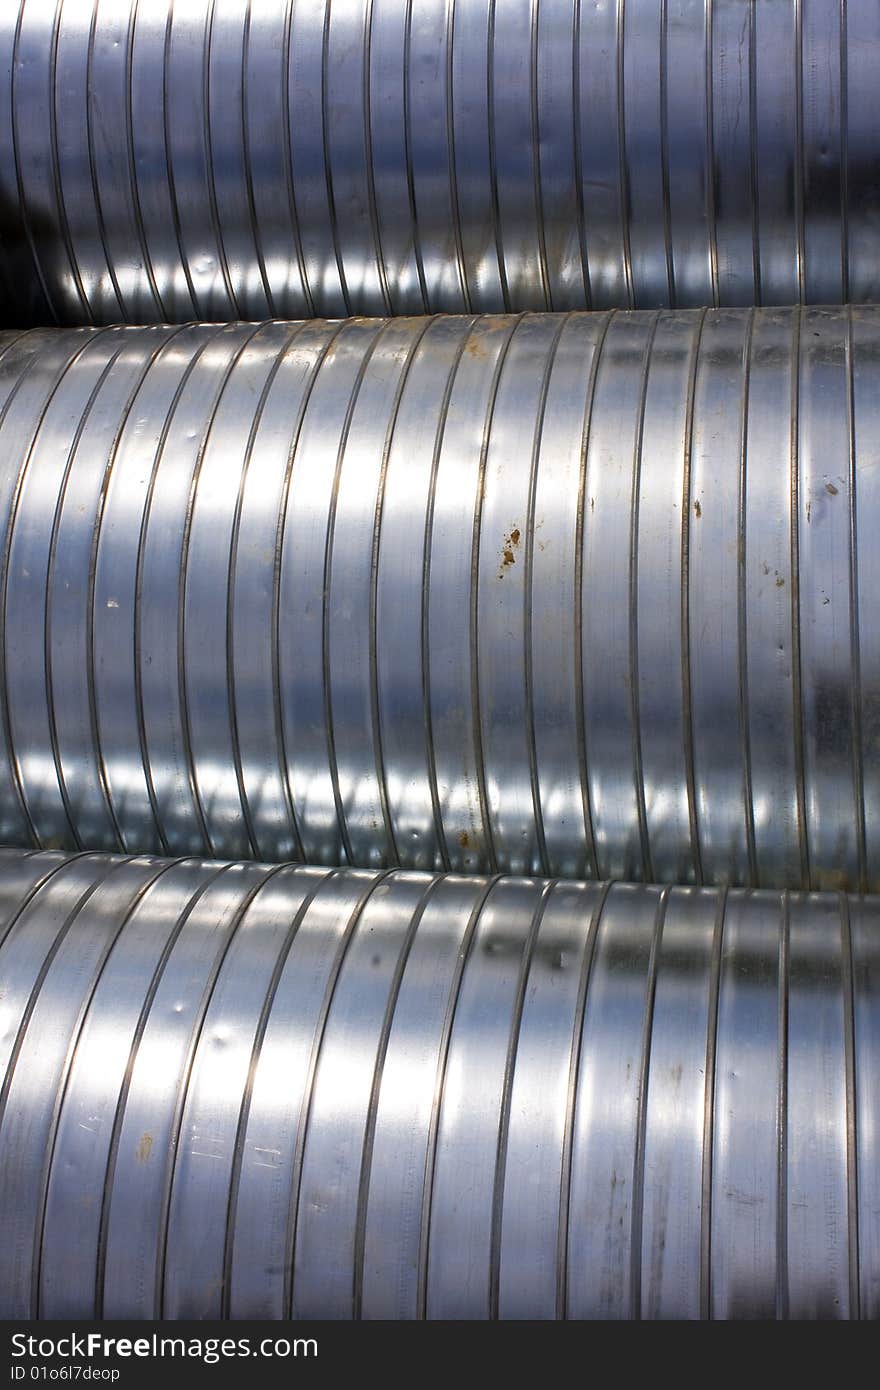 Steel tubes seen by close